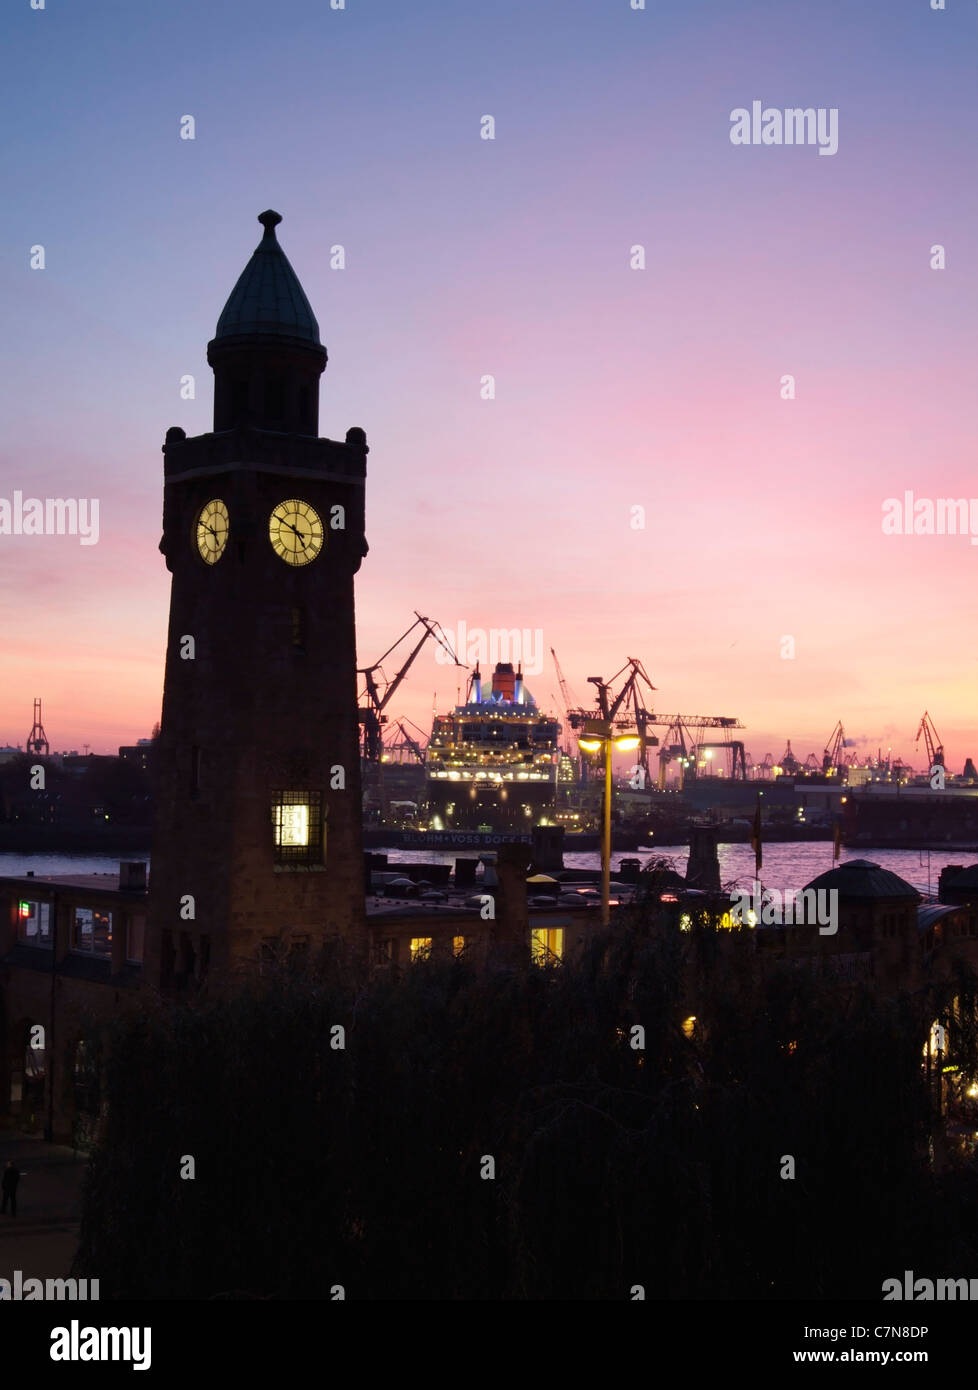 Silhouette of the Landungsbruecken with passenger cruise ship Queen Mary 2 in the shipyards, Hamburg, Germany Stock Photo